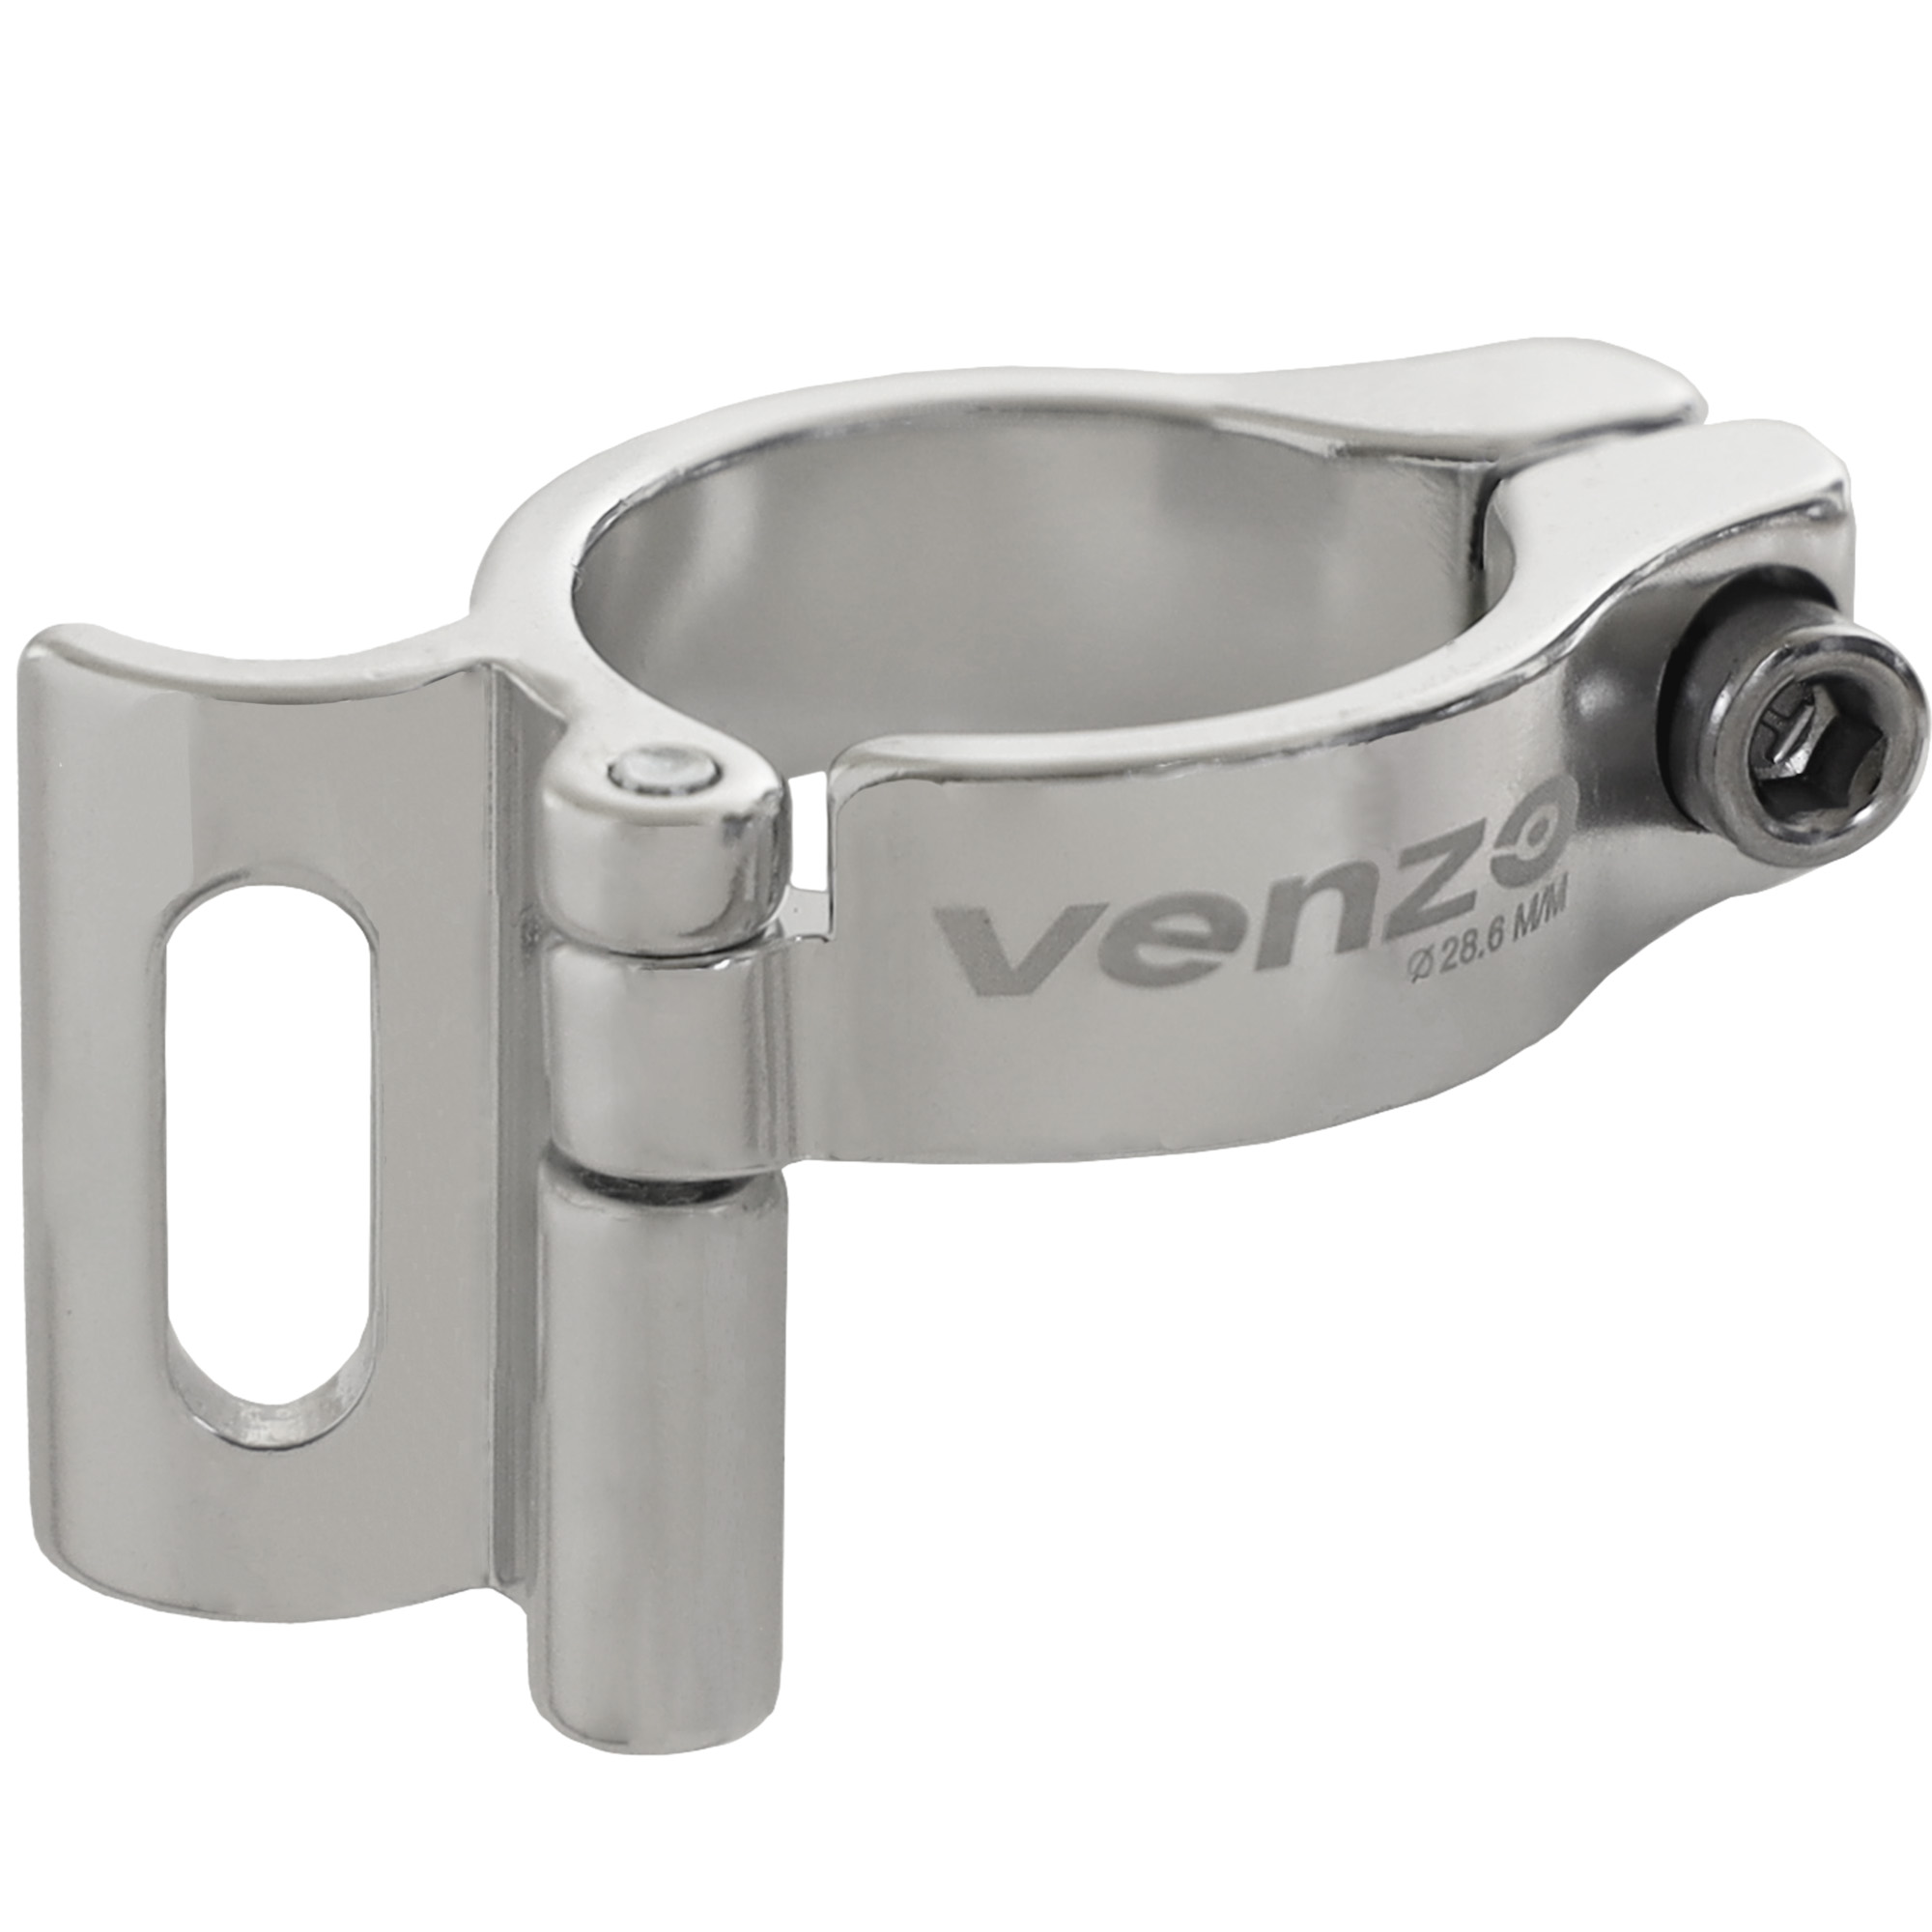 Venzo Road Mountain Bike Bicycle Adjustable Braze-on Front Derailleur Adapter Clamp 28.6mm Silver